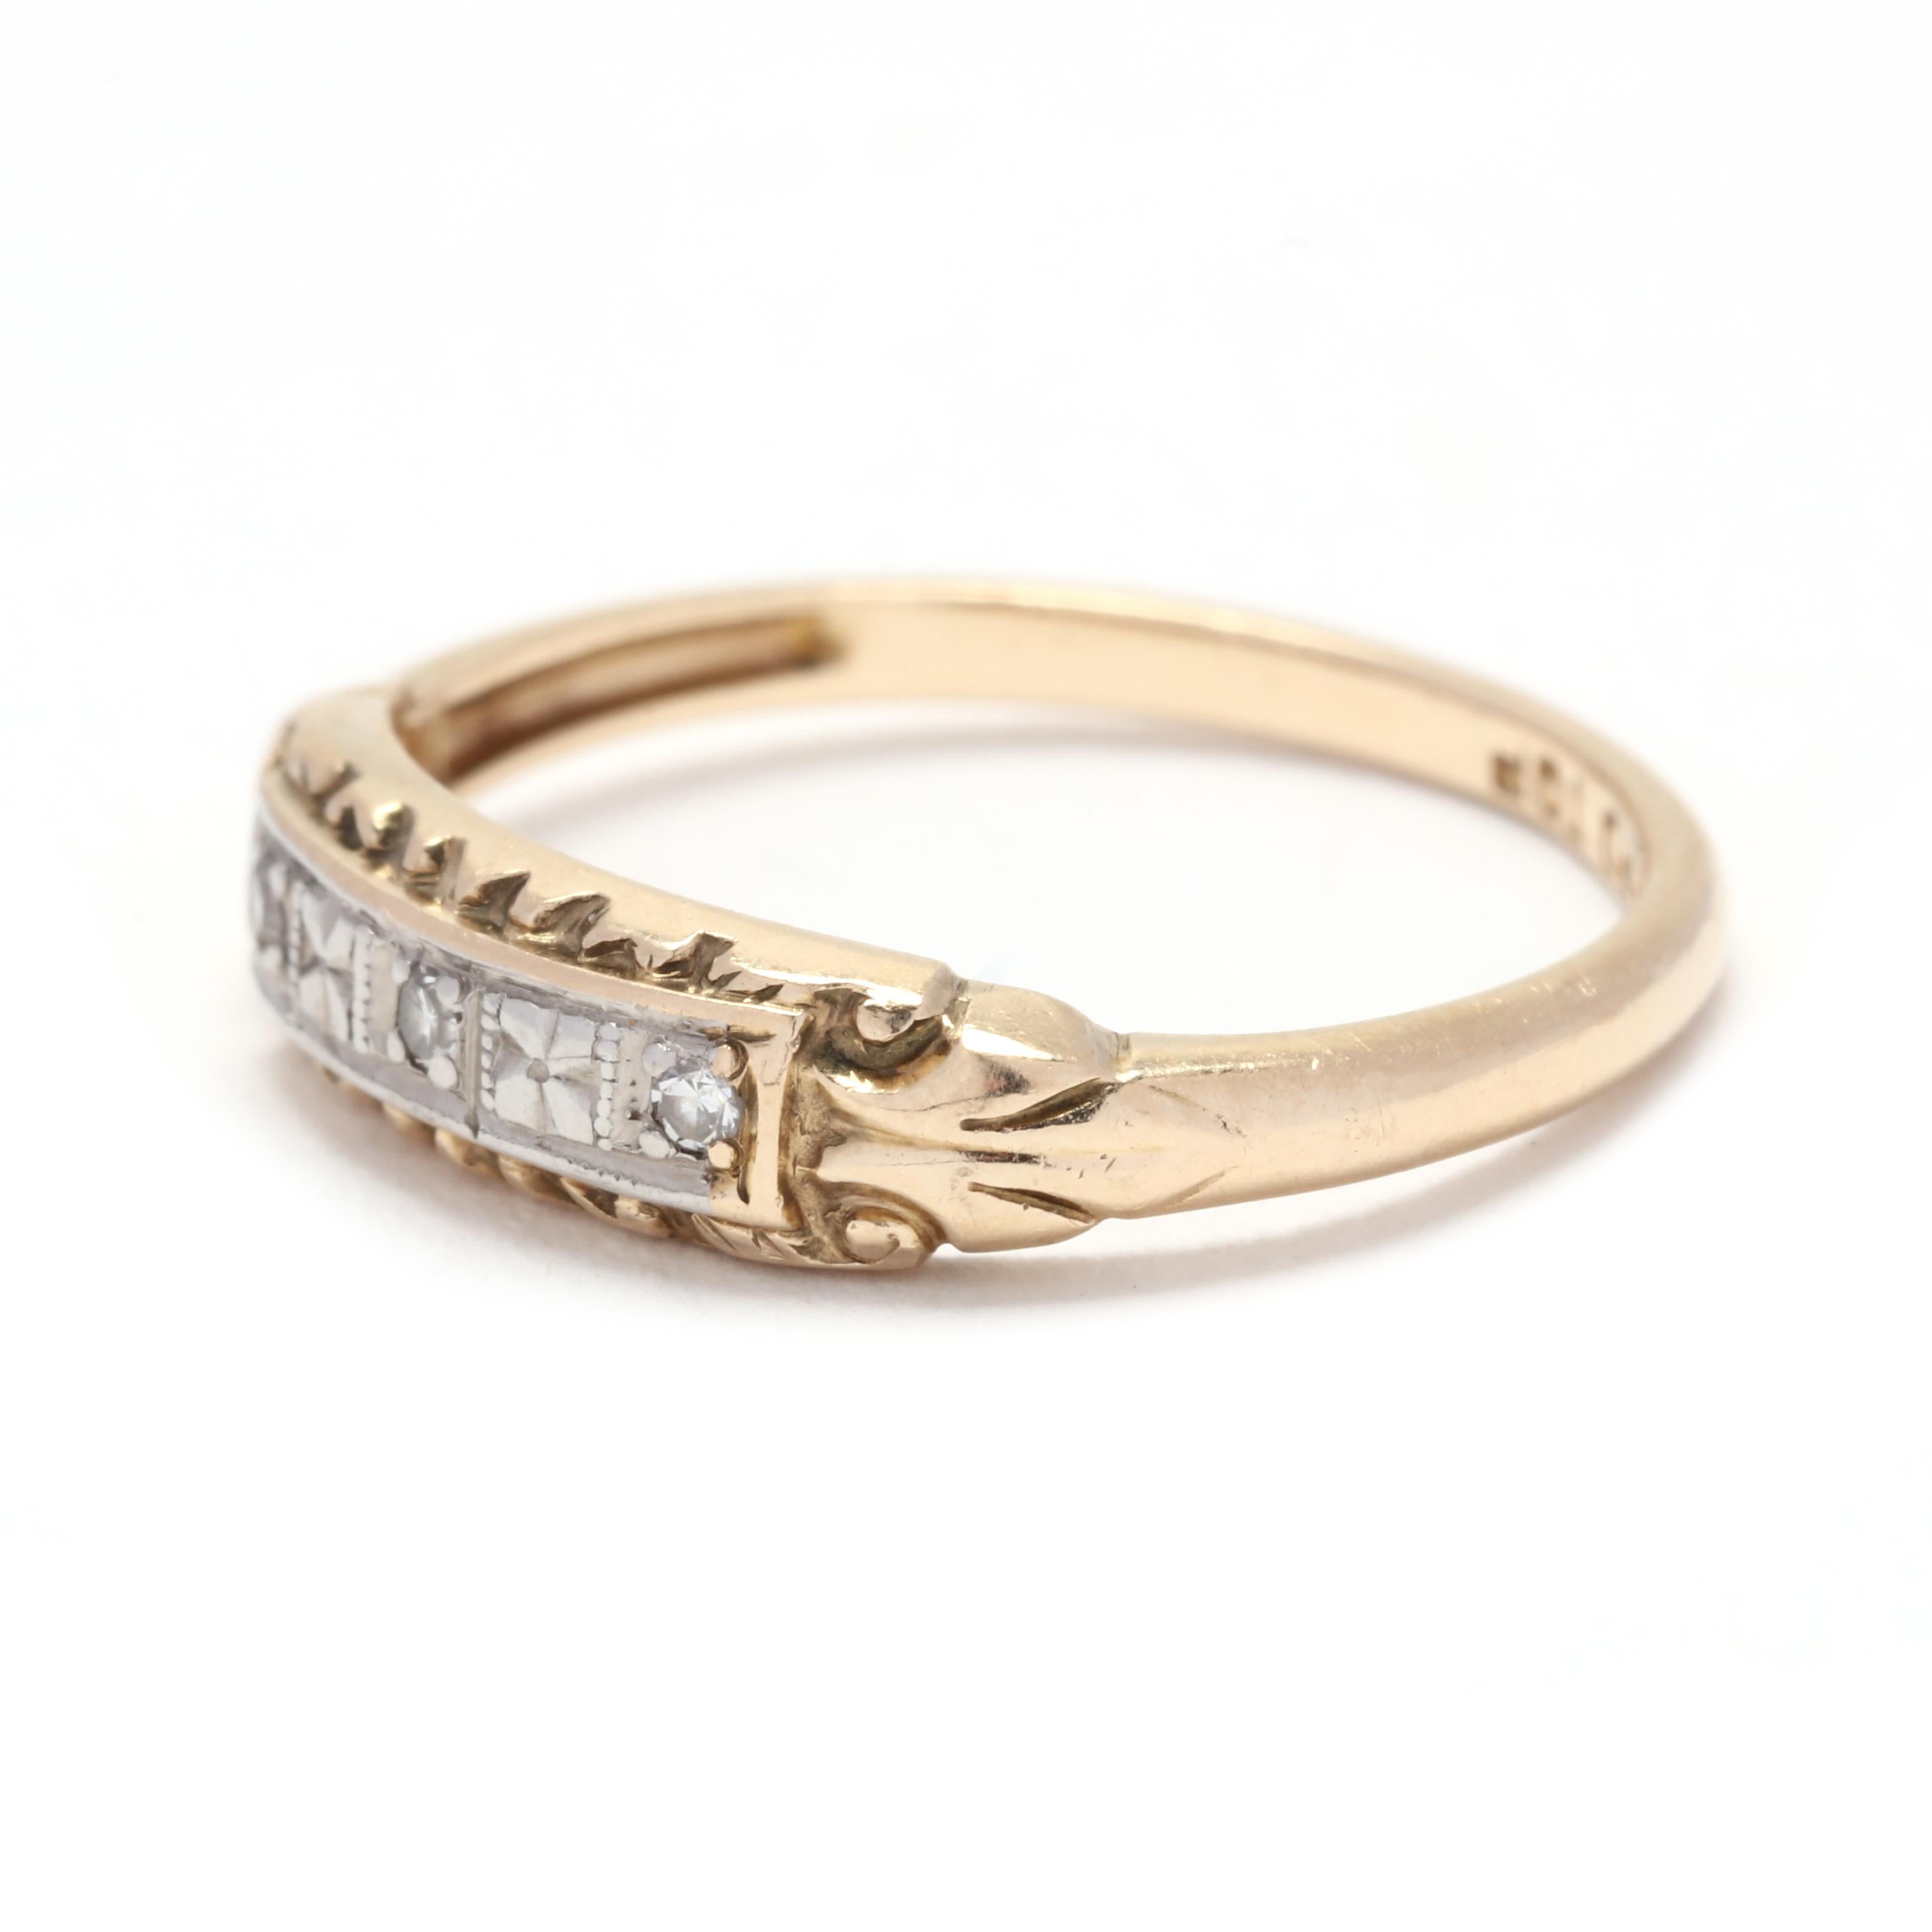 Round Cut 0.03ctw Retro Diamond Wedding Band, 14K Yellow Gold, Ring Size 4.25, Stackable 